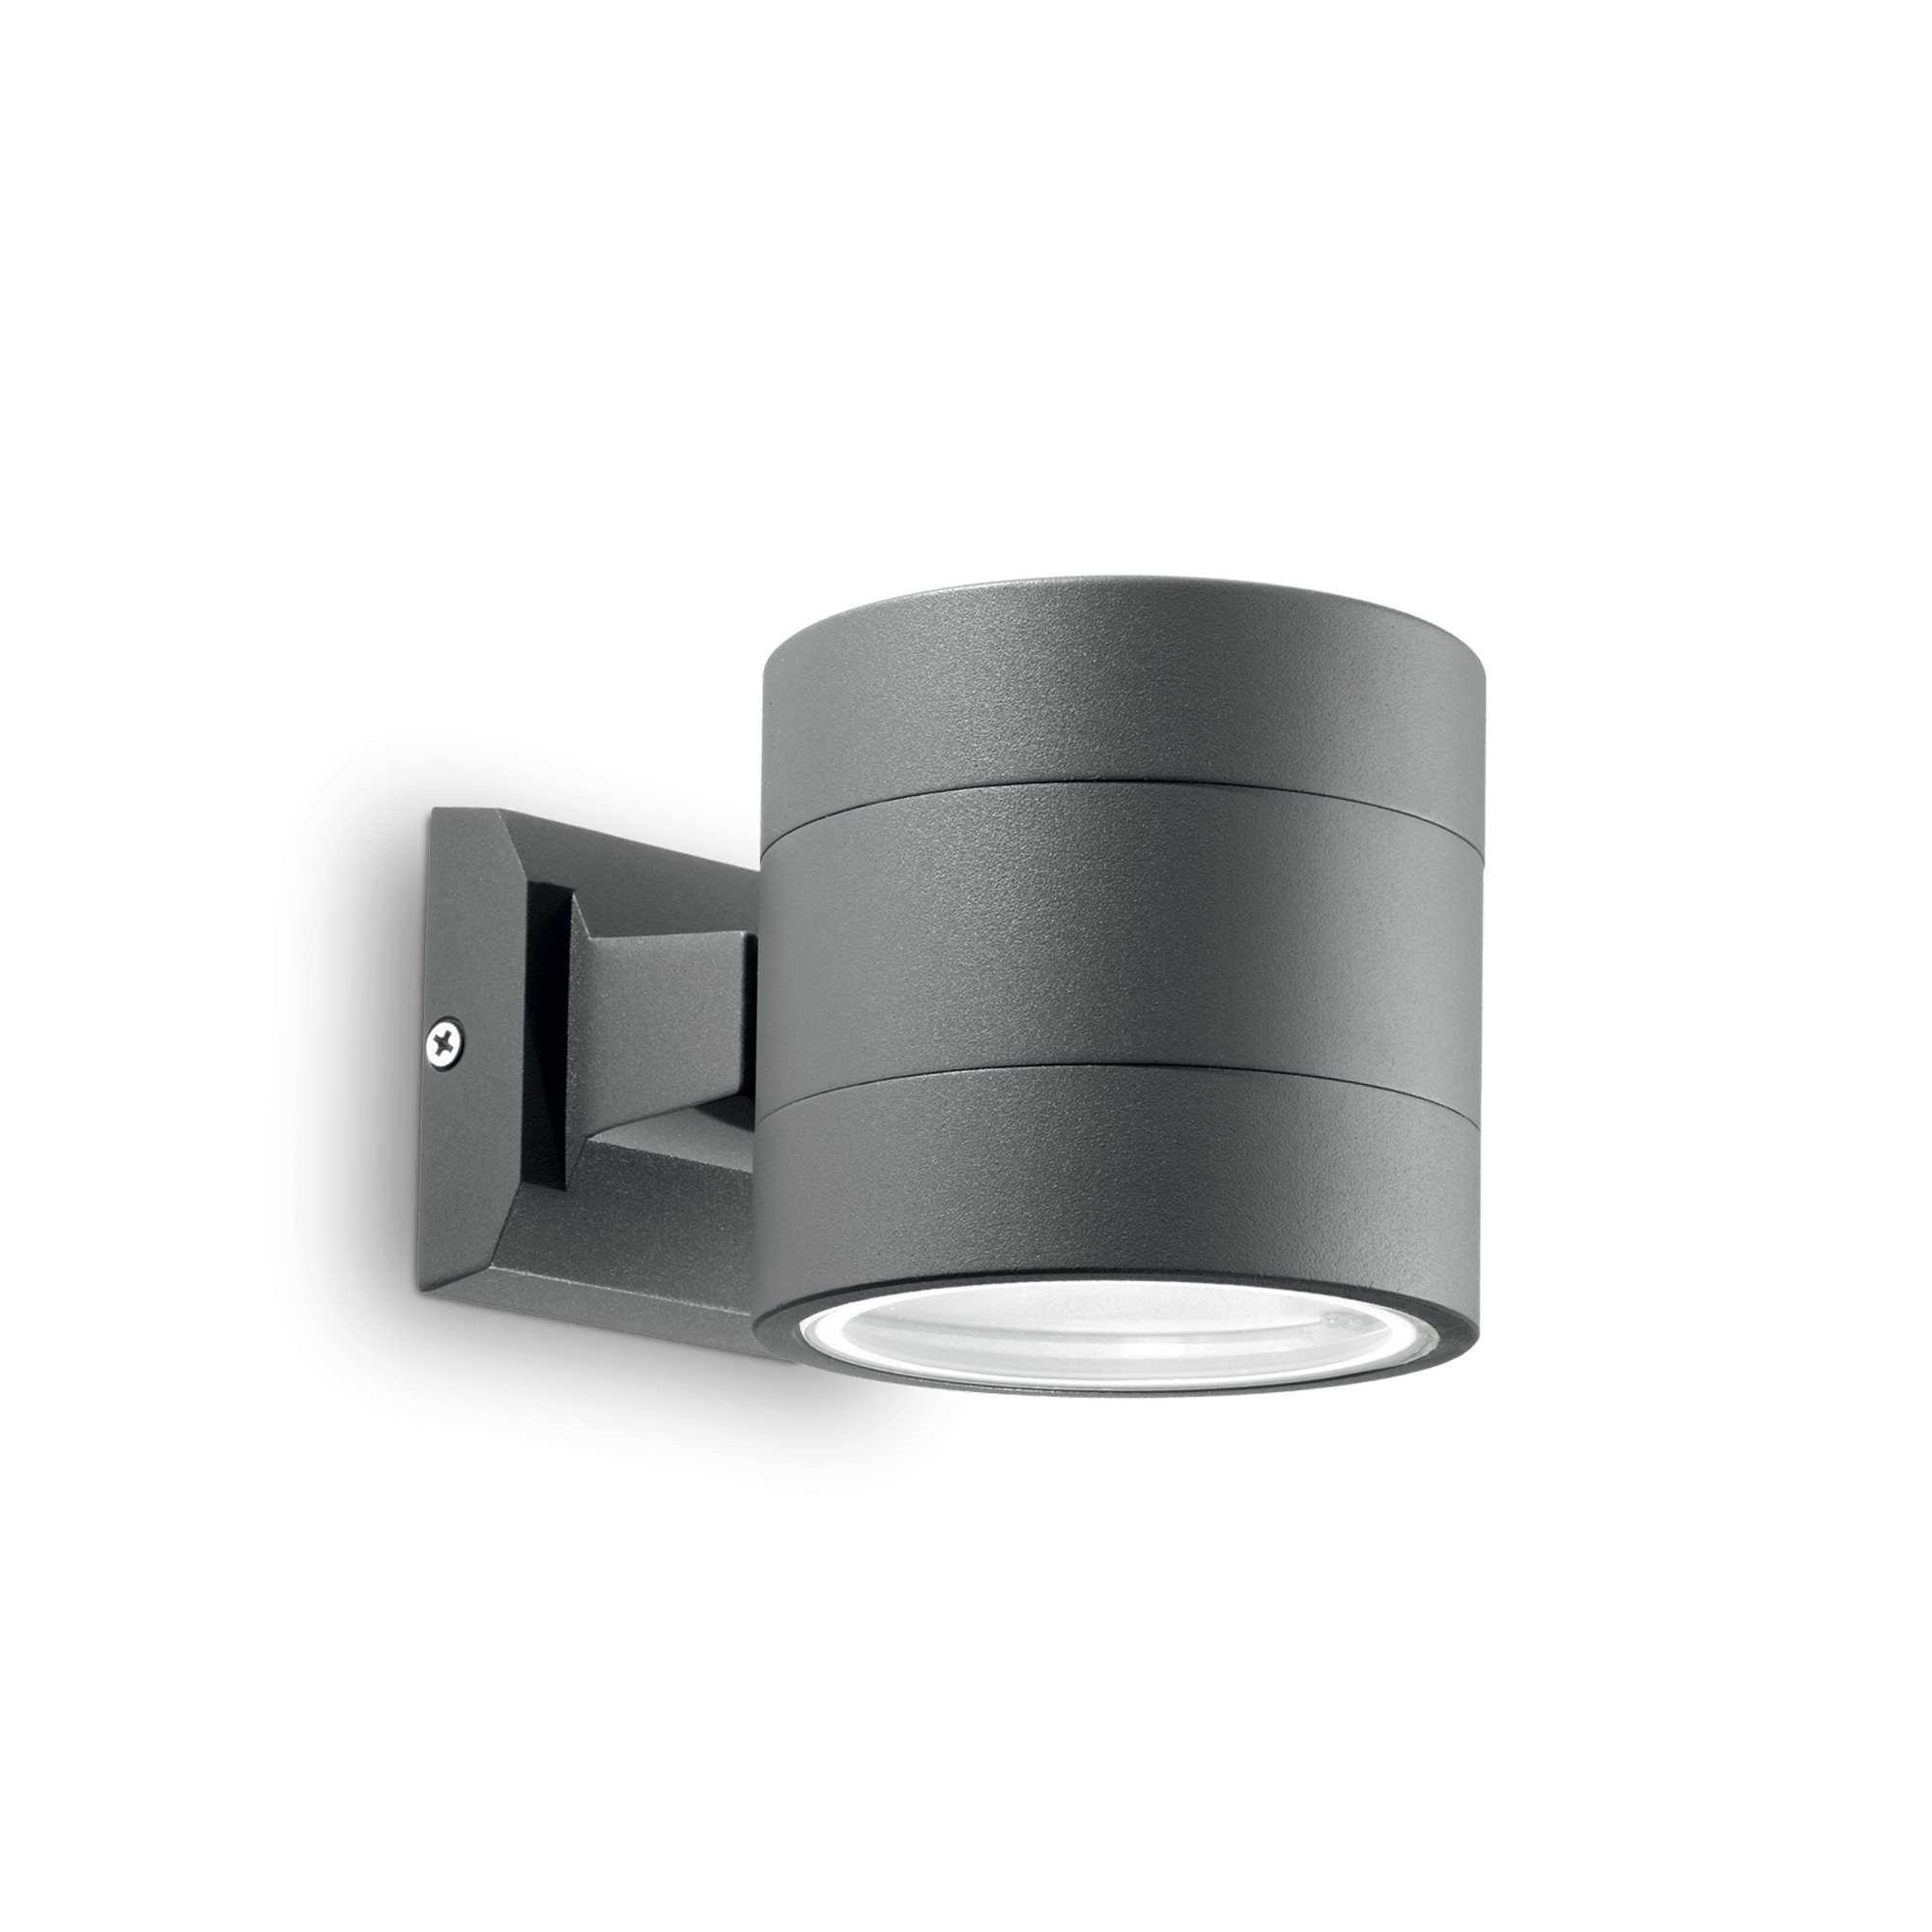 Snif Round 1 Light Outdoor Up Down Wall Light Black Anthracite IP54 G9